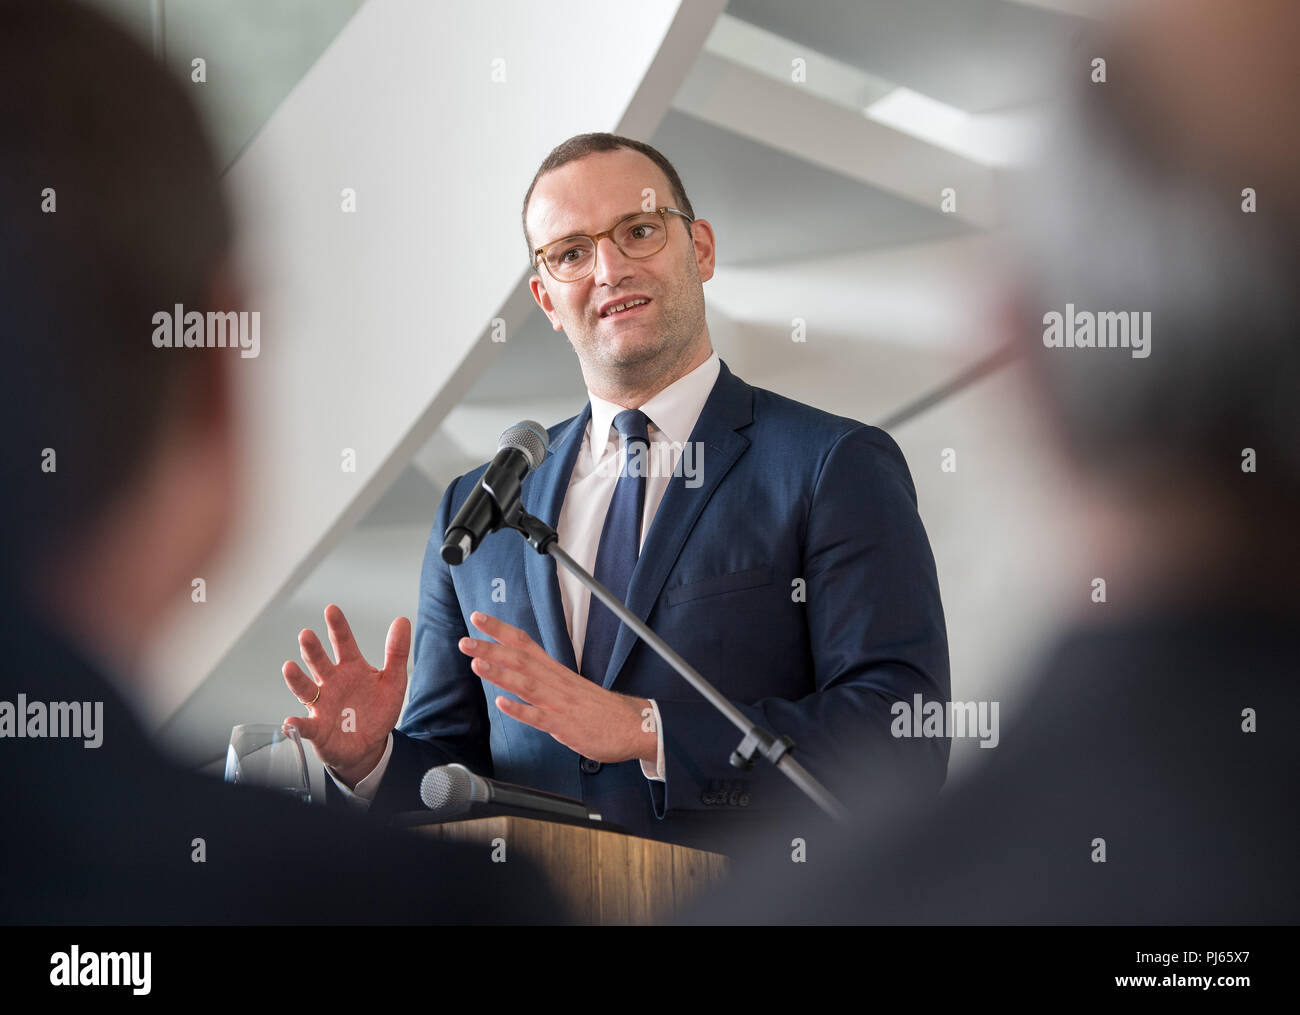 September 4, 2018, Saxony, Wilsdruff: Jens Spahn of the Christian Democratic Union (CDU), Federal Minister of Health, speaks at the inauguration of the new dialyzer production facility at B. Braun Avitum Saxonia GmbH. The construction of the new plant cost over 100 million euros. It is Europe's most modern dialyzer factory. Photo: Monika Skolimowska/dpa-Zentralbild/dpa Stock Photo